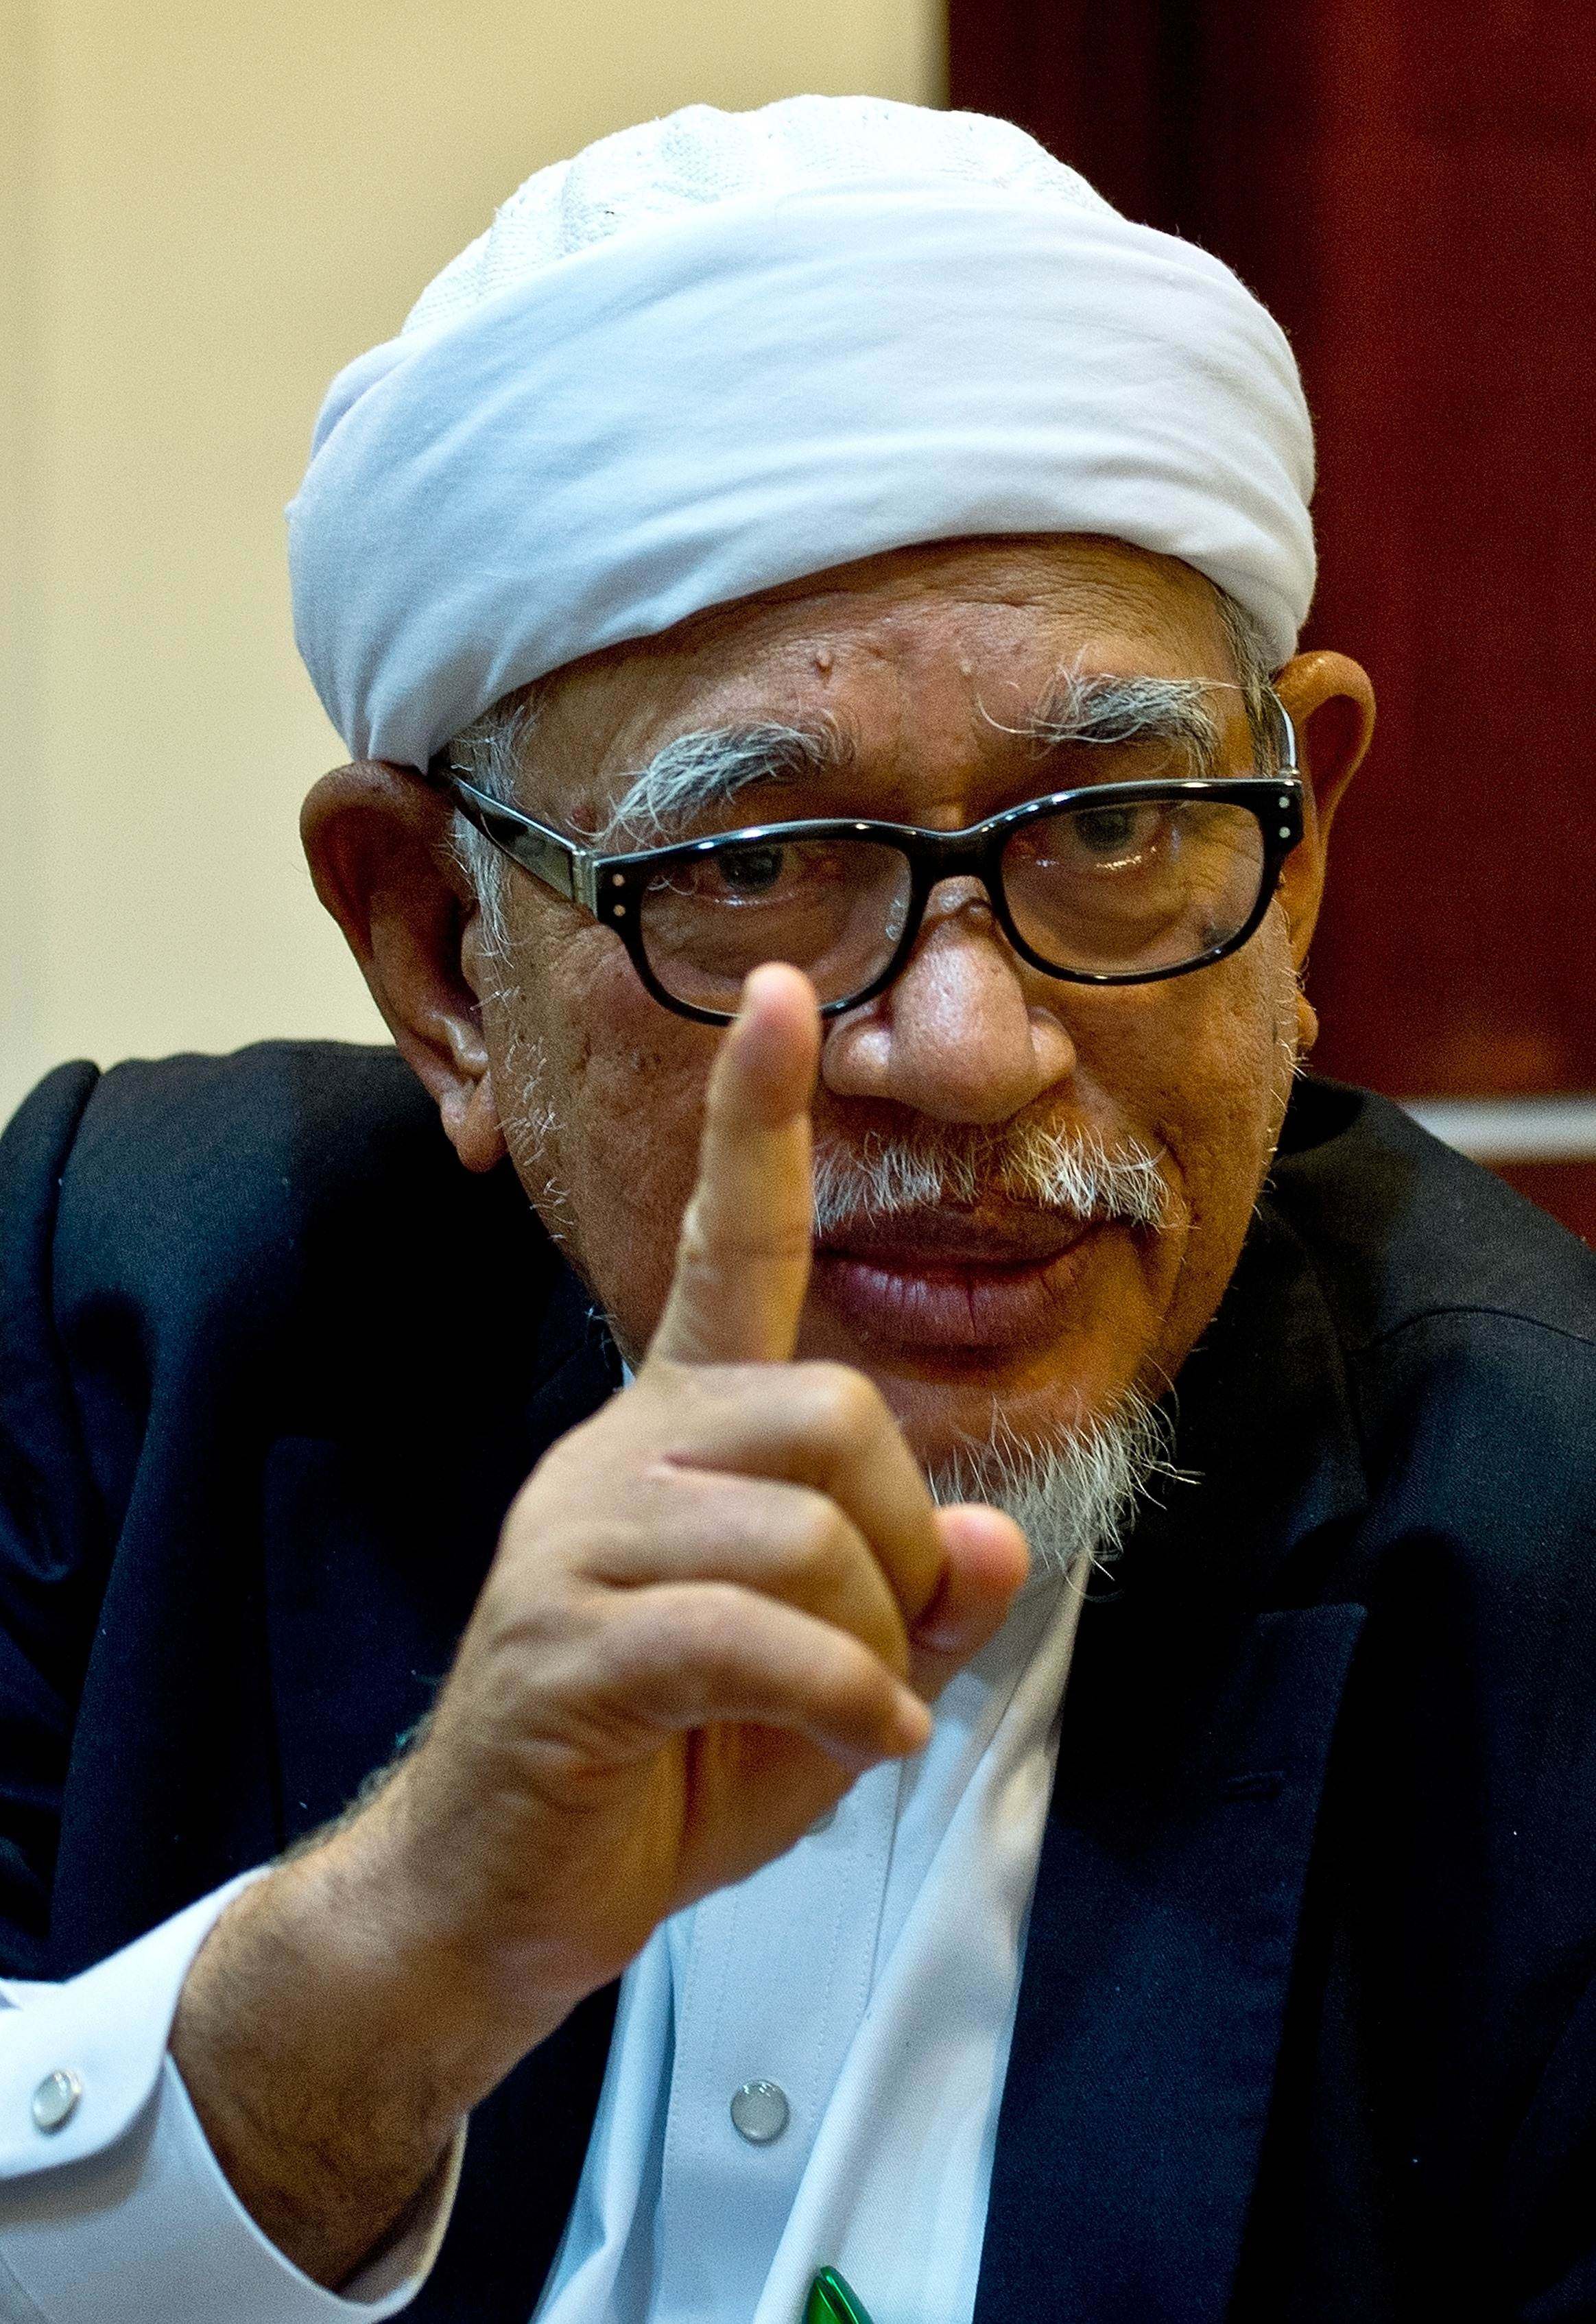 Malaysian Islamic Party (PAS) president Hadi Awang gestures during an interview at the party HQ in Kuala Lumpur in 2015. Photo: AFP